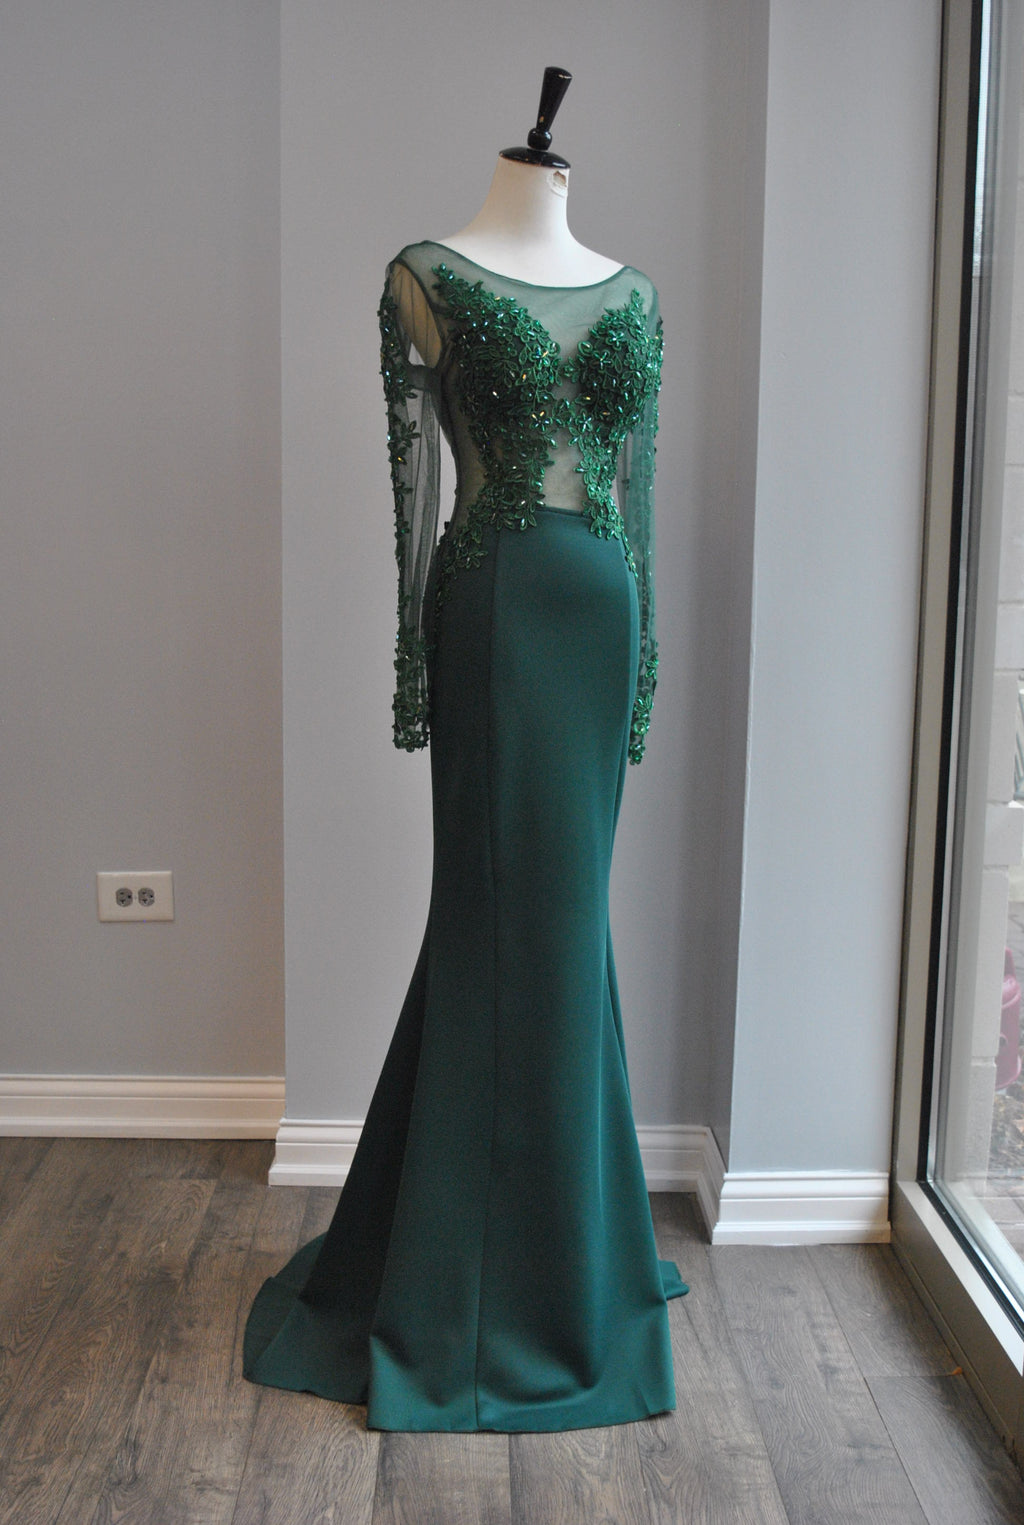 EMERALD LONG EVENING DRESS WITH MESH AND CRYSTALS